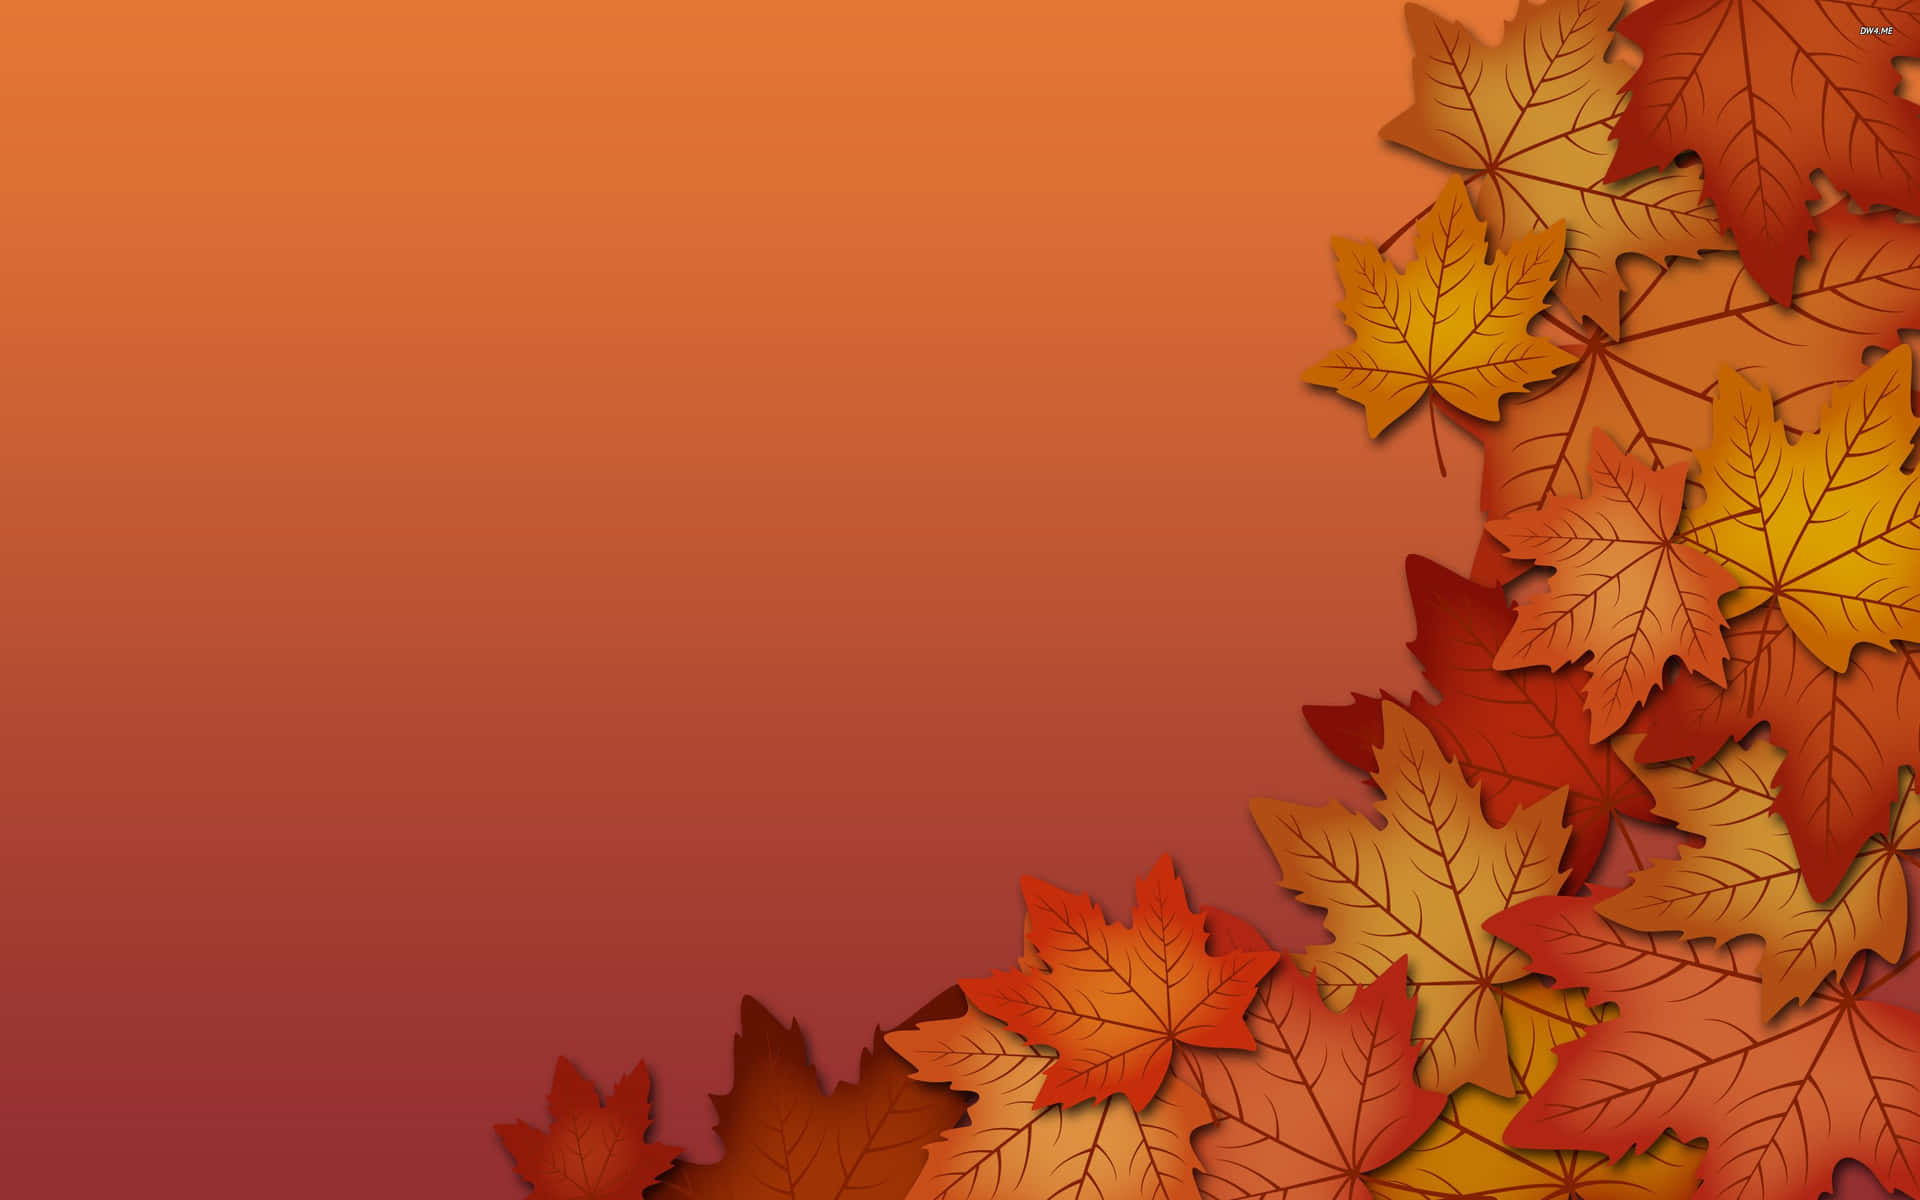 Make the most of Autumn's natural beauty Wallpaper